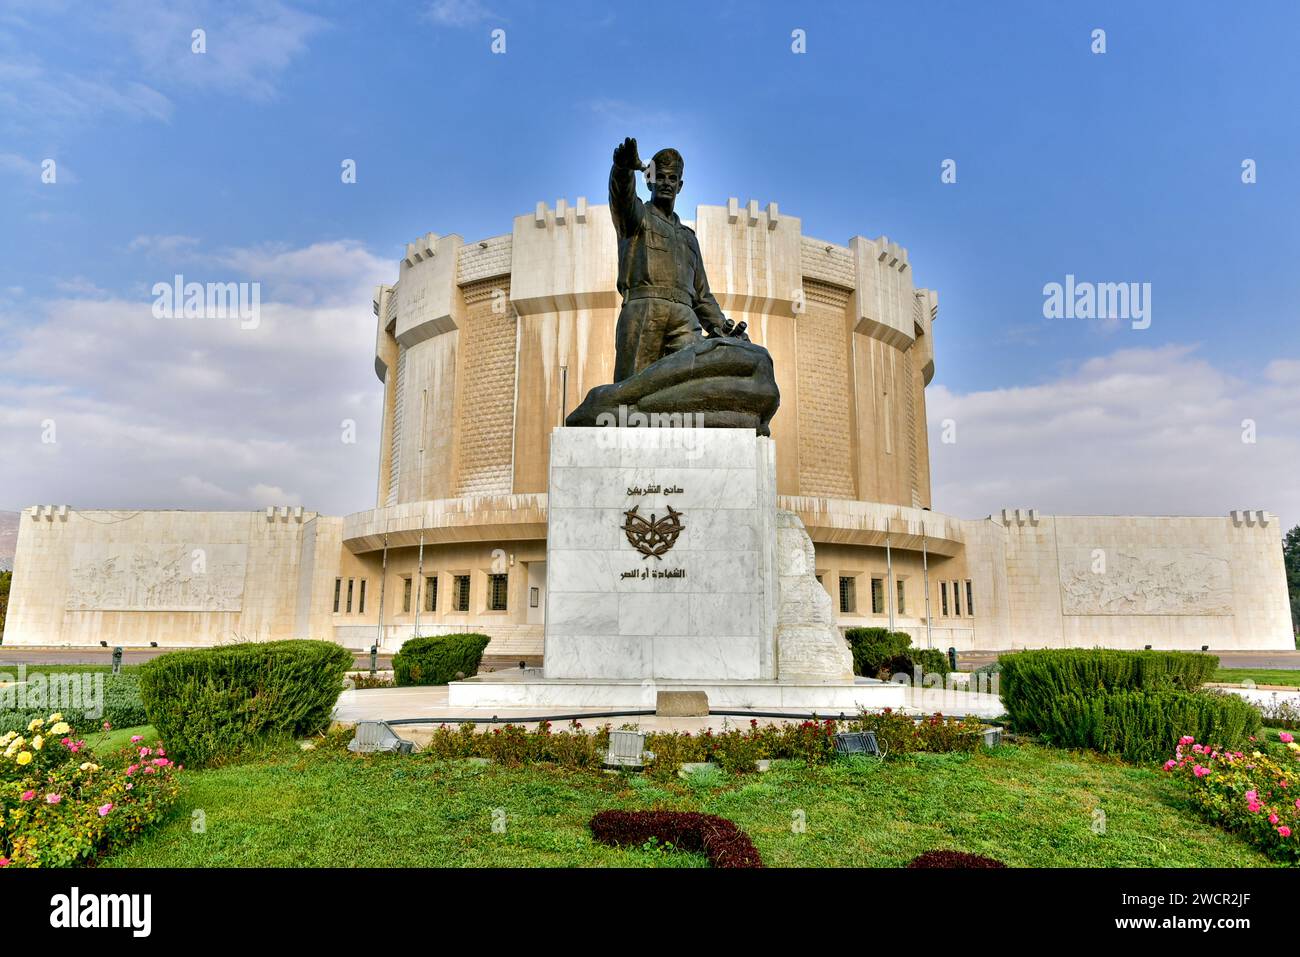 Statue of Hafez Al-Assad in October War Panorama, a national museum commemorating the October War in 1973. Damascus, Syria. Stock Photo